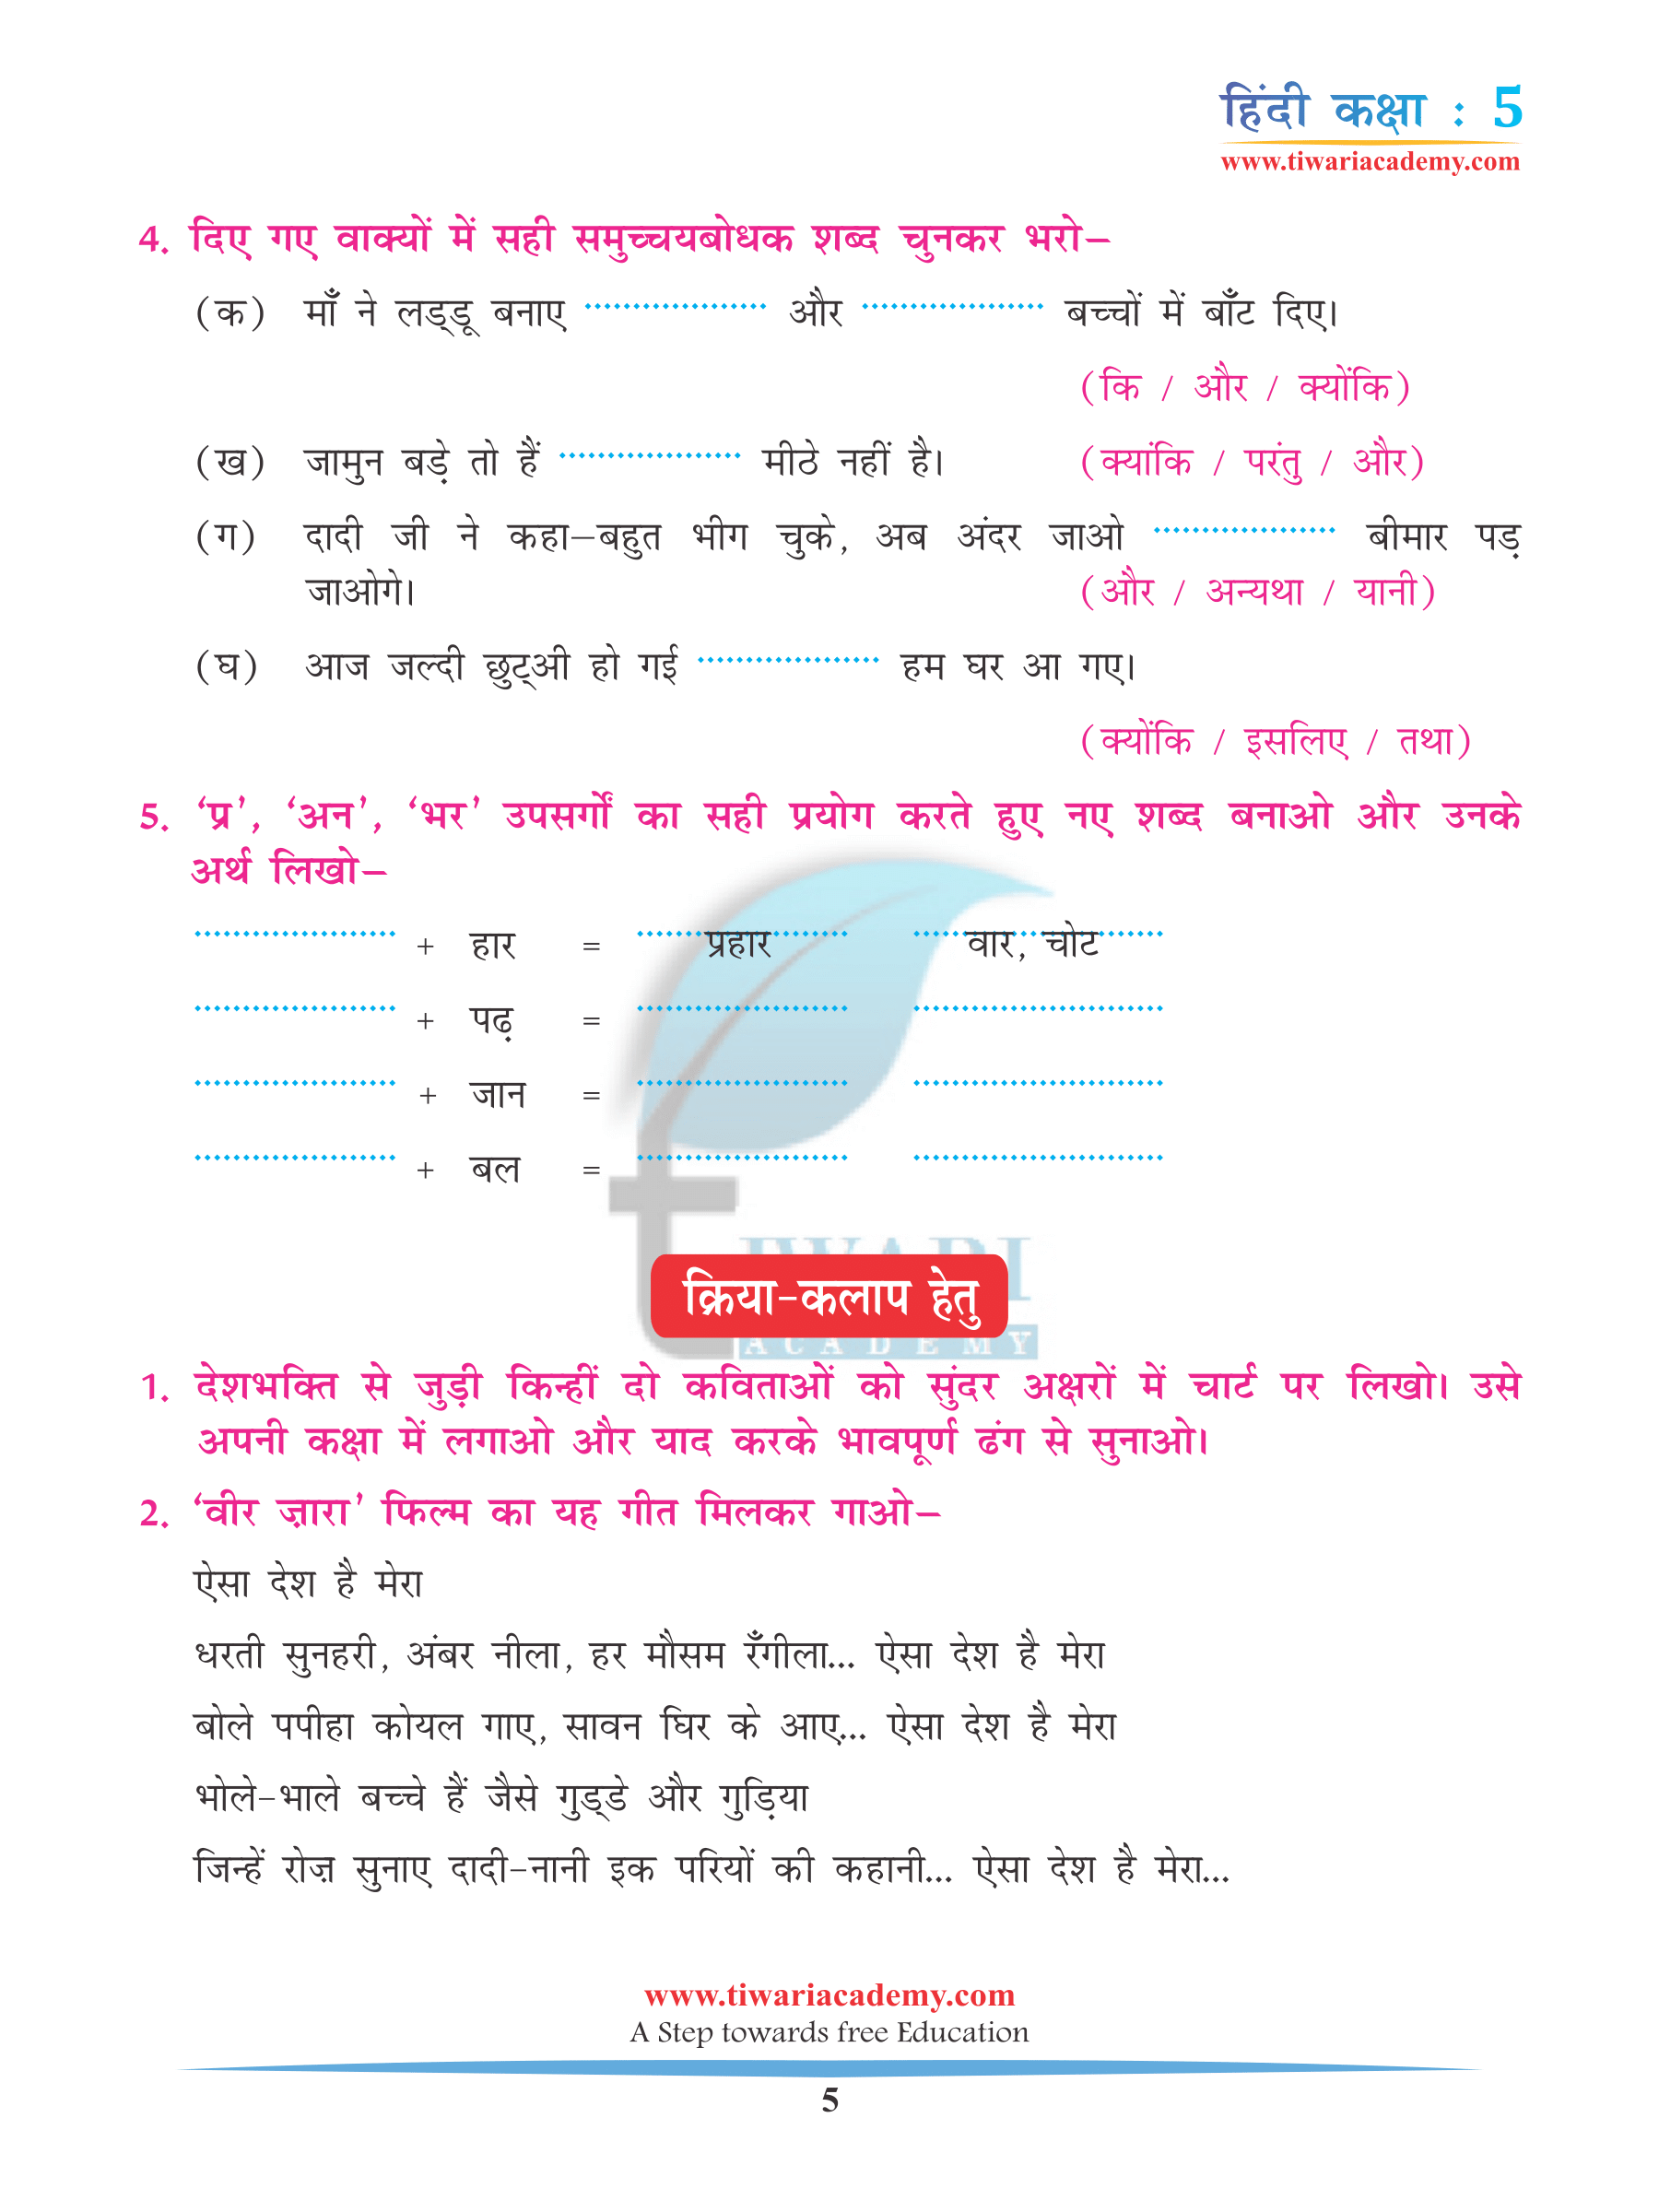 Class 5 Hindi Chapter 1 Revision book